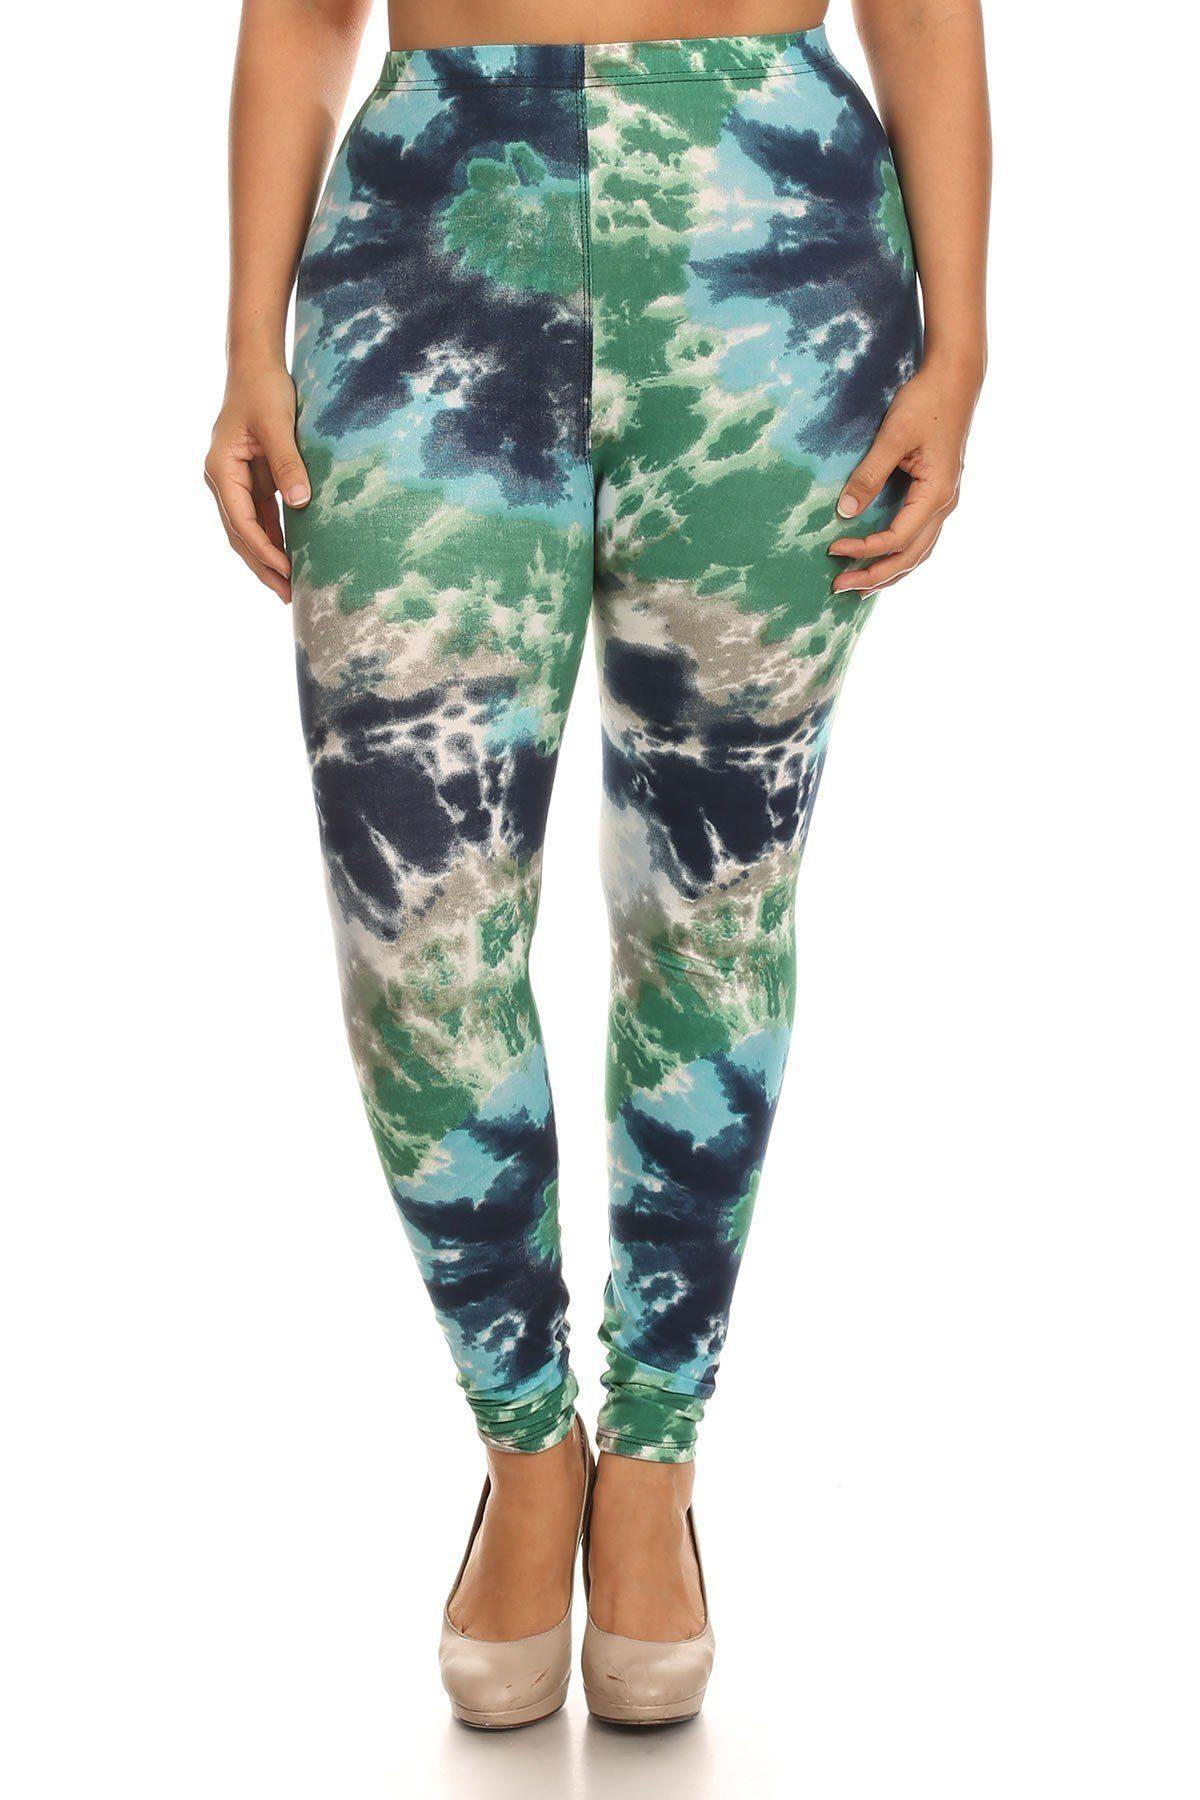 Plus Size Tie Dye Print, Full Length Leggings In A Fitted Style With A Banded High Waist - Pearlara